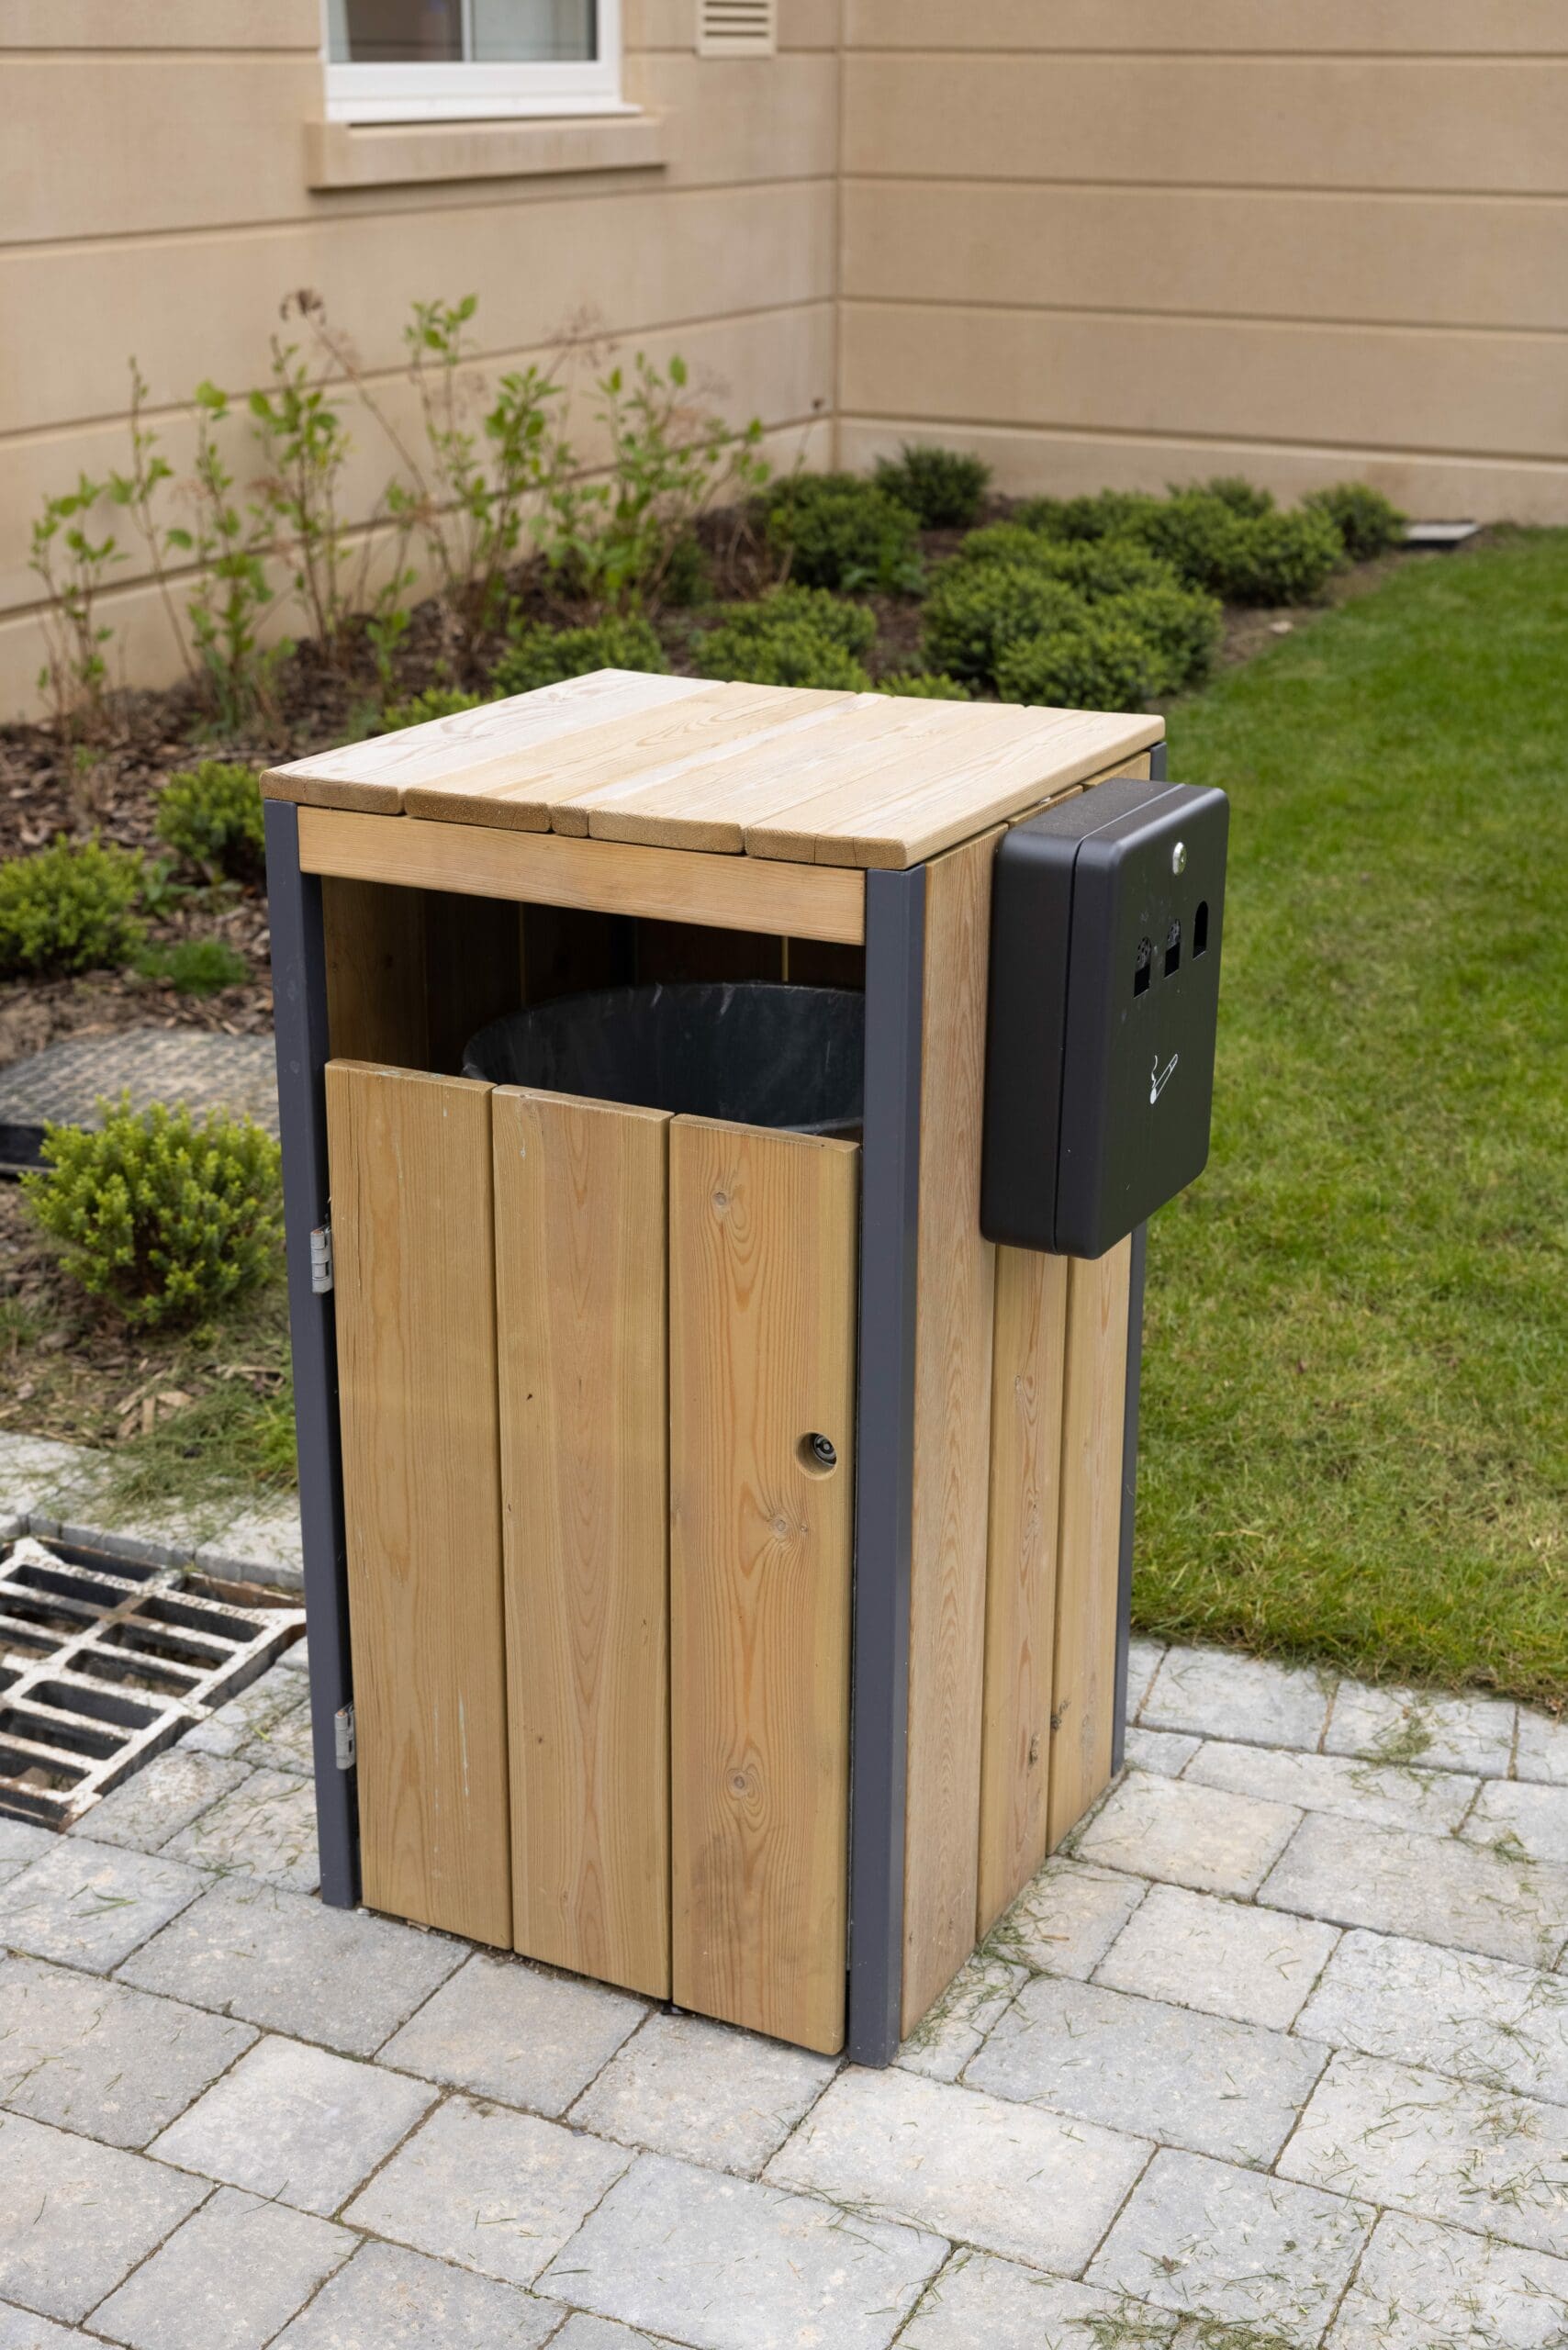 wooden outdoor bin with attached cigarette bin